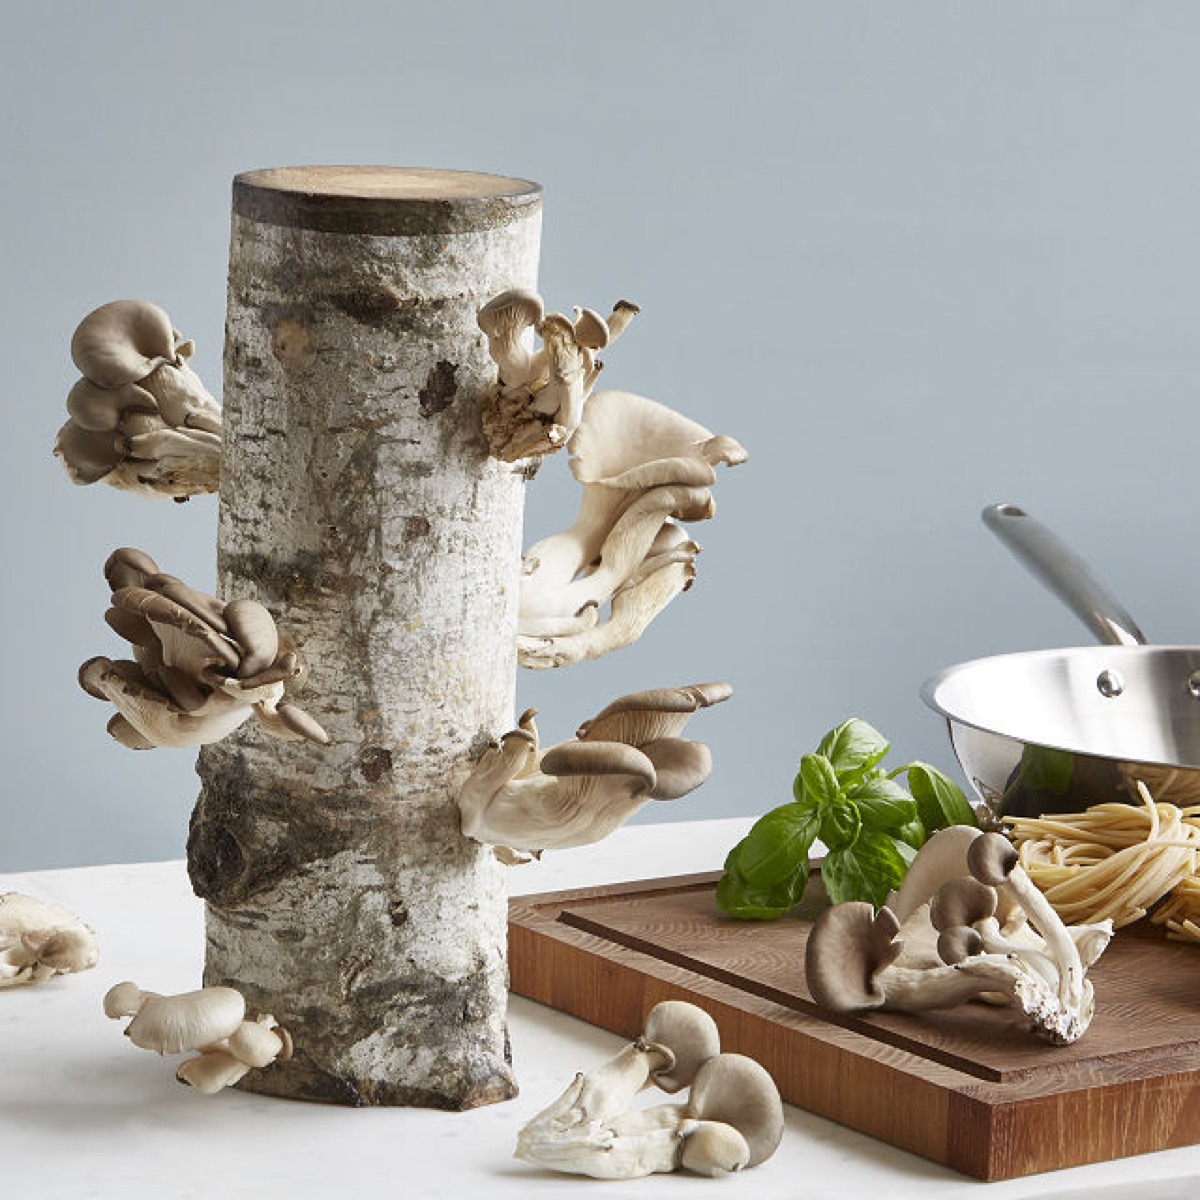 mushroom growing kit, father's day gifts, gifts for dad